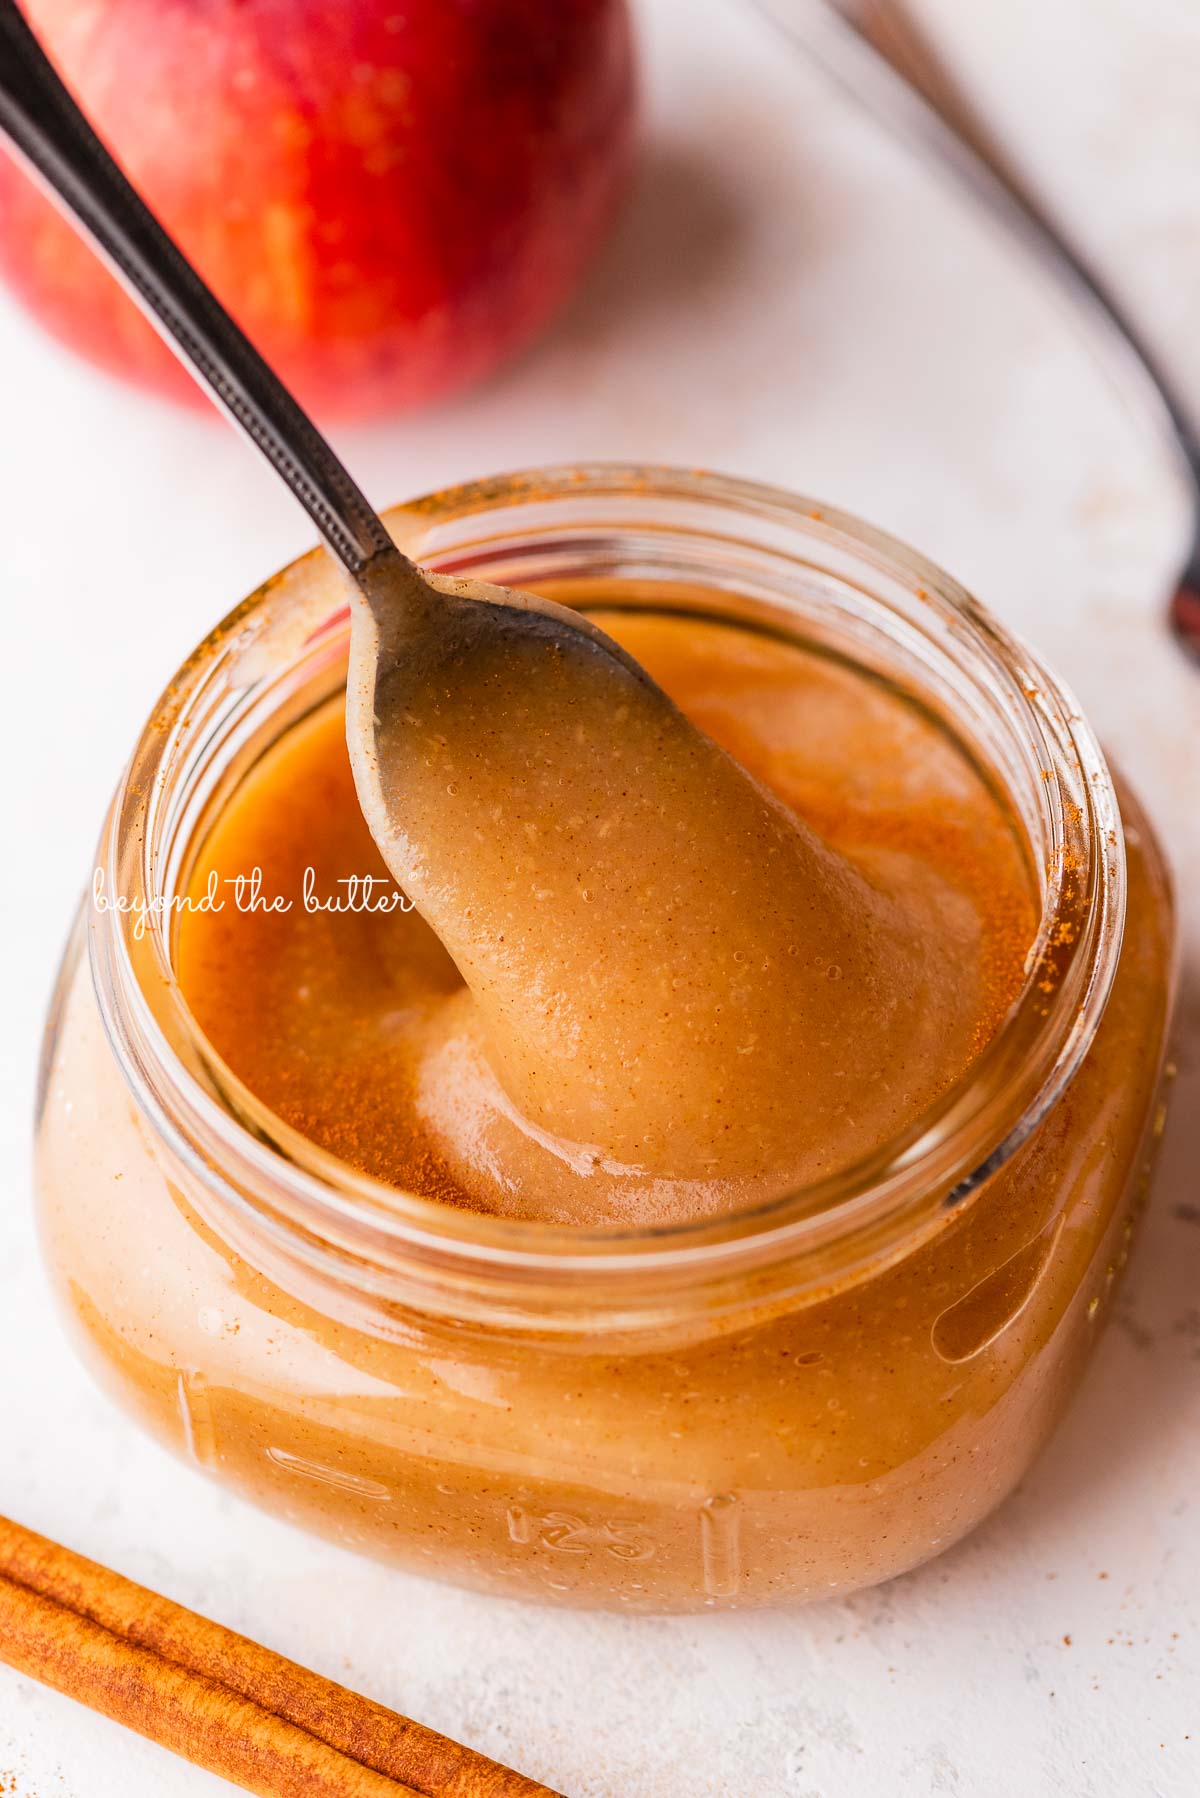 Filled glass jar of no sugar added homemade applesauce with a spoon on white background with apples.